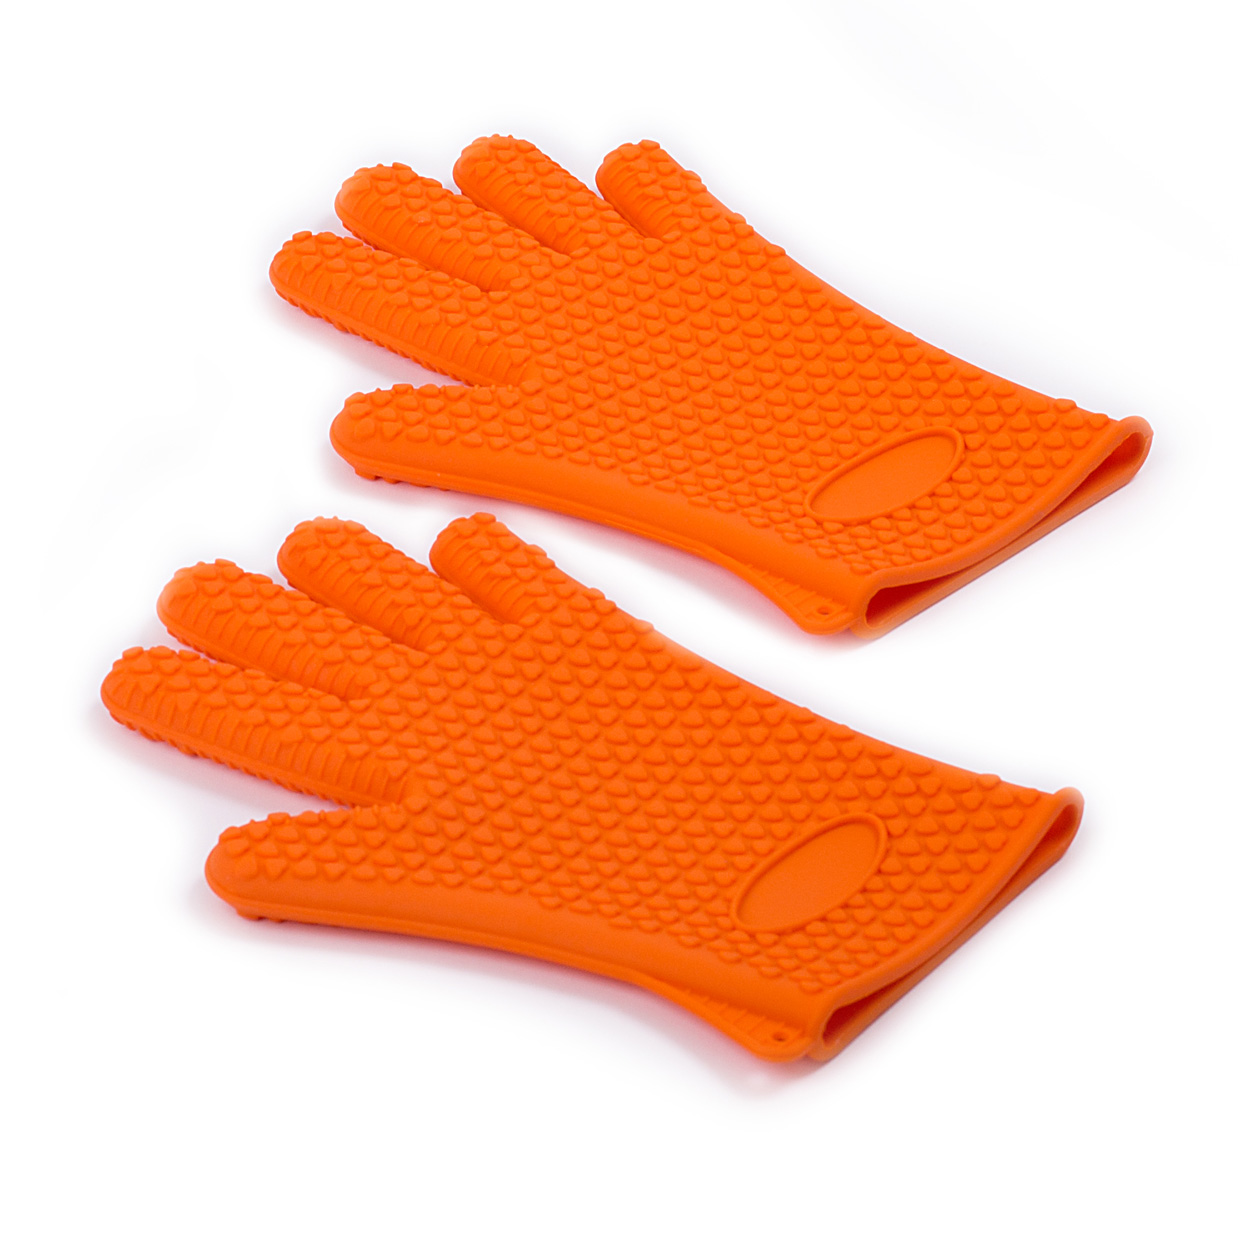 Silicone Heat Resistant Baking Gloves 